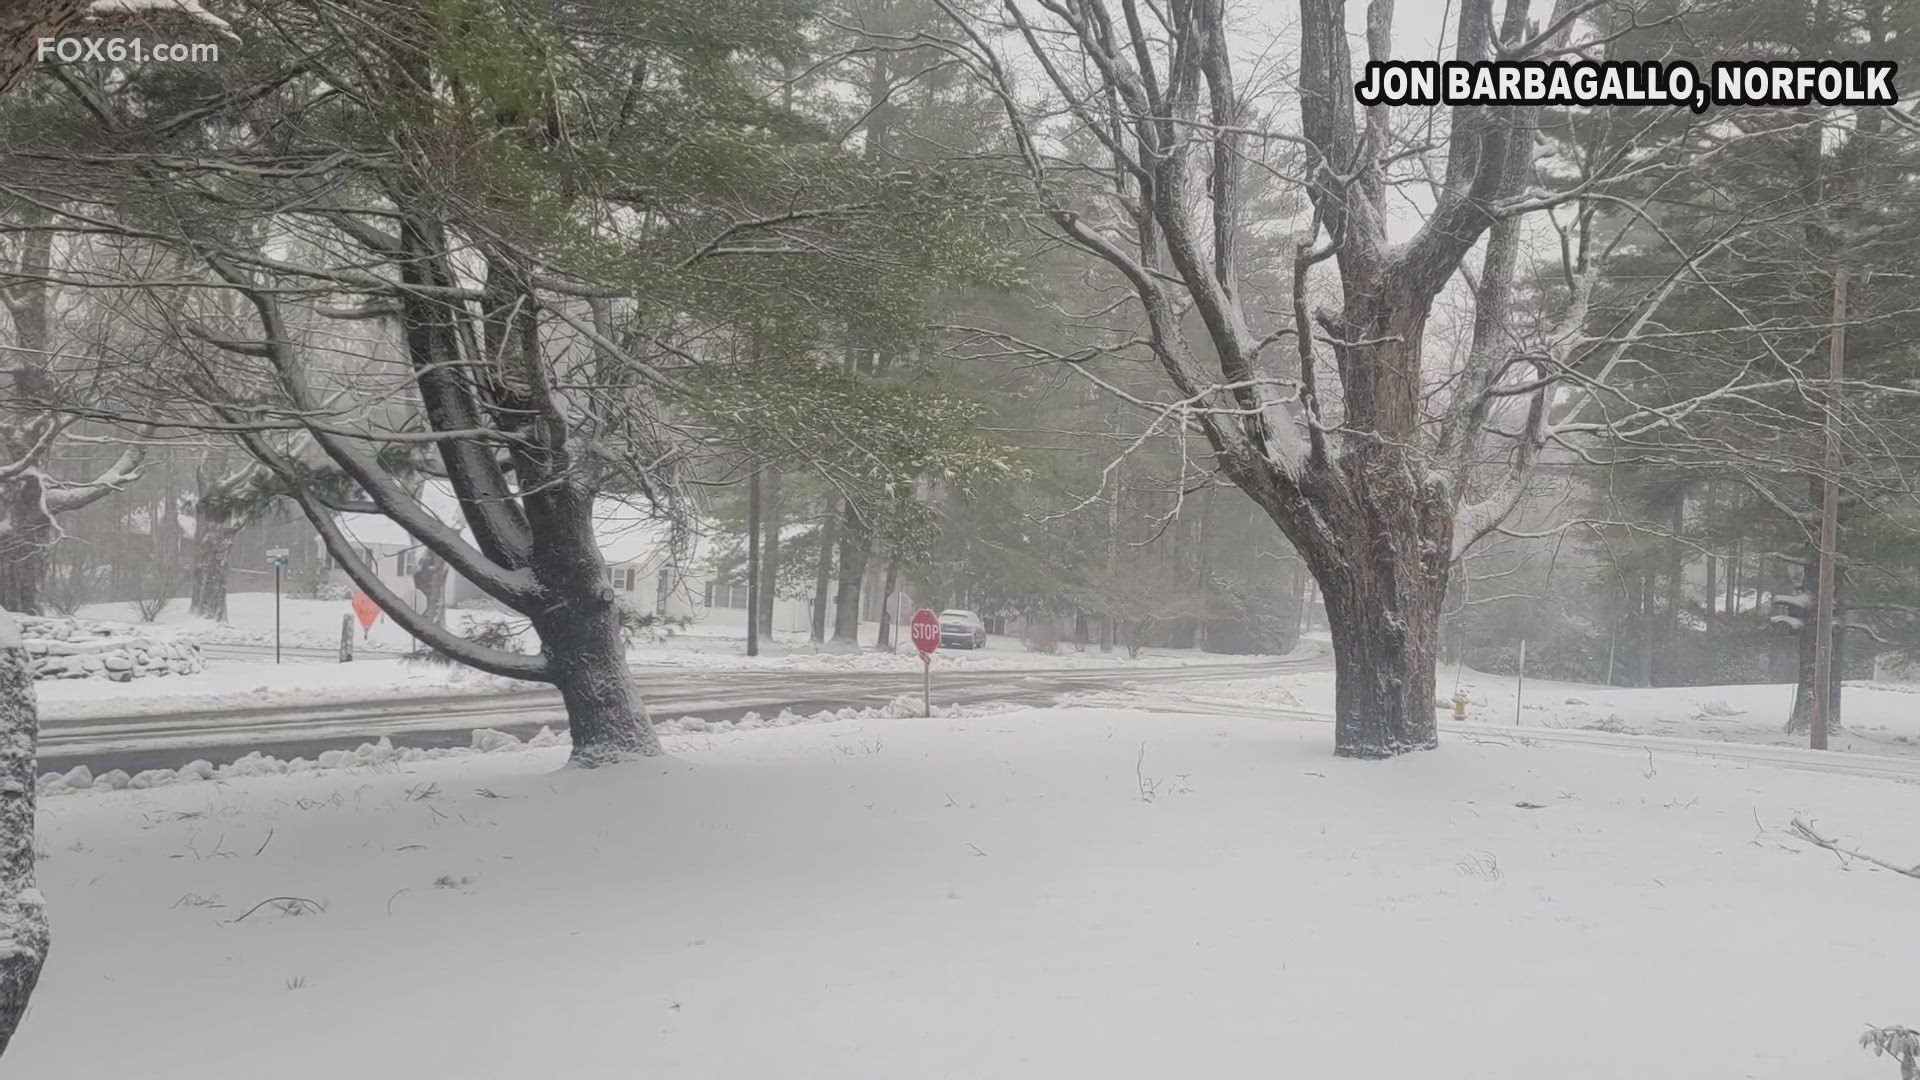 In parts of Connecticut, an icy mix, and even snow, coated roads Thursday morning. Elsewhere in the state, flooding was a problem.